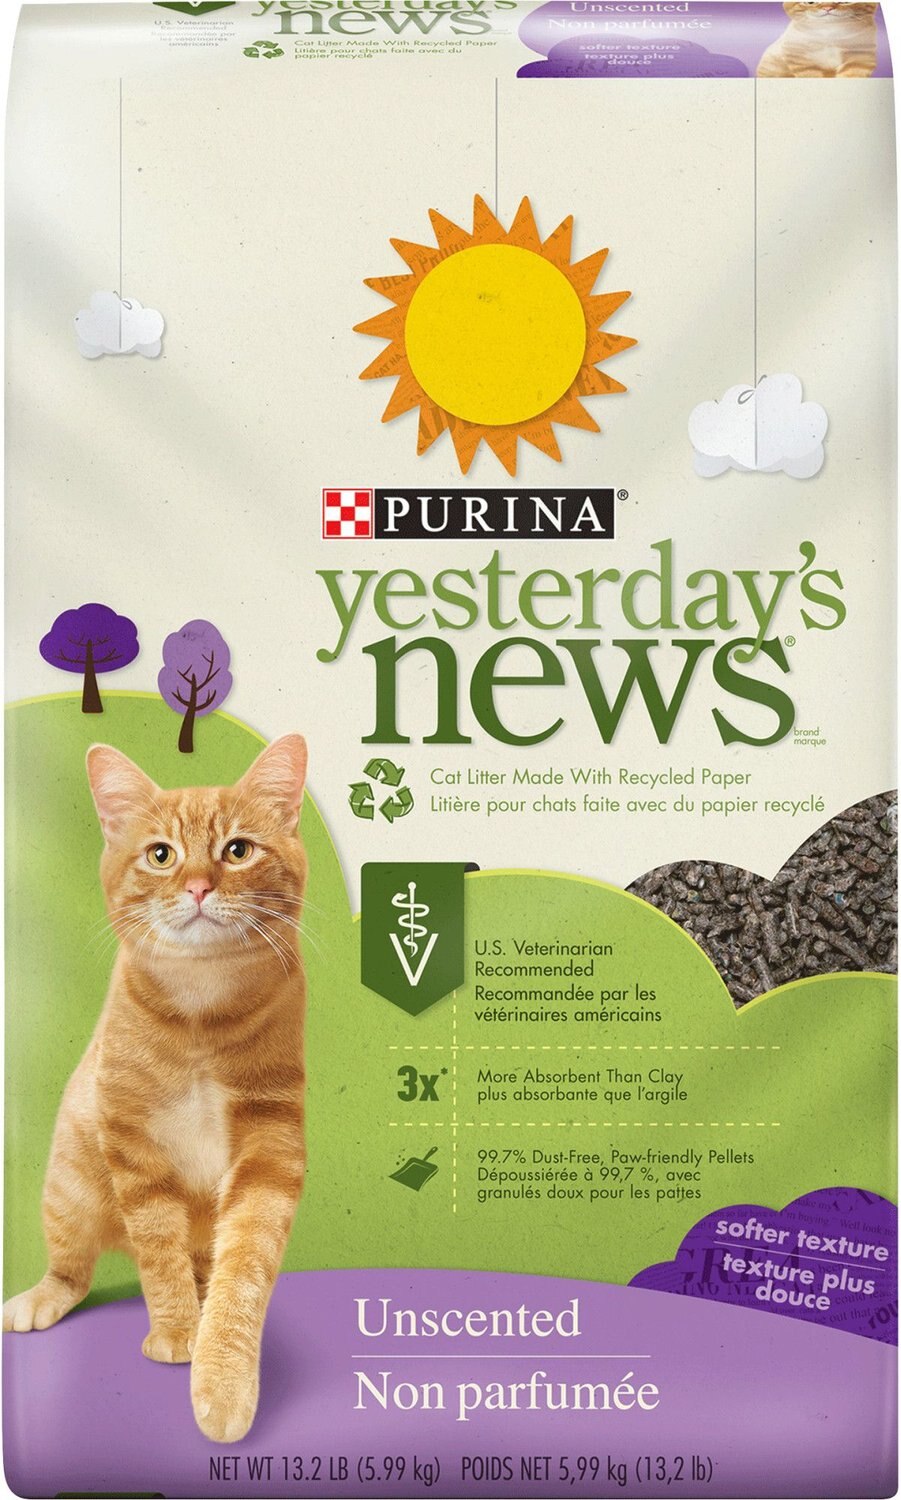 Purina Yesterday's News Unscented Paper Cat Litter New Fast Free Shipping 